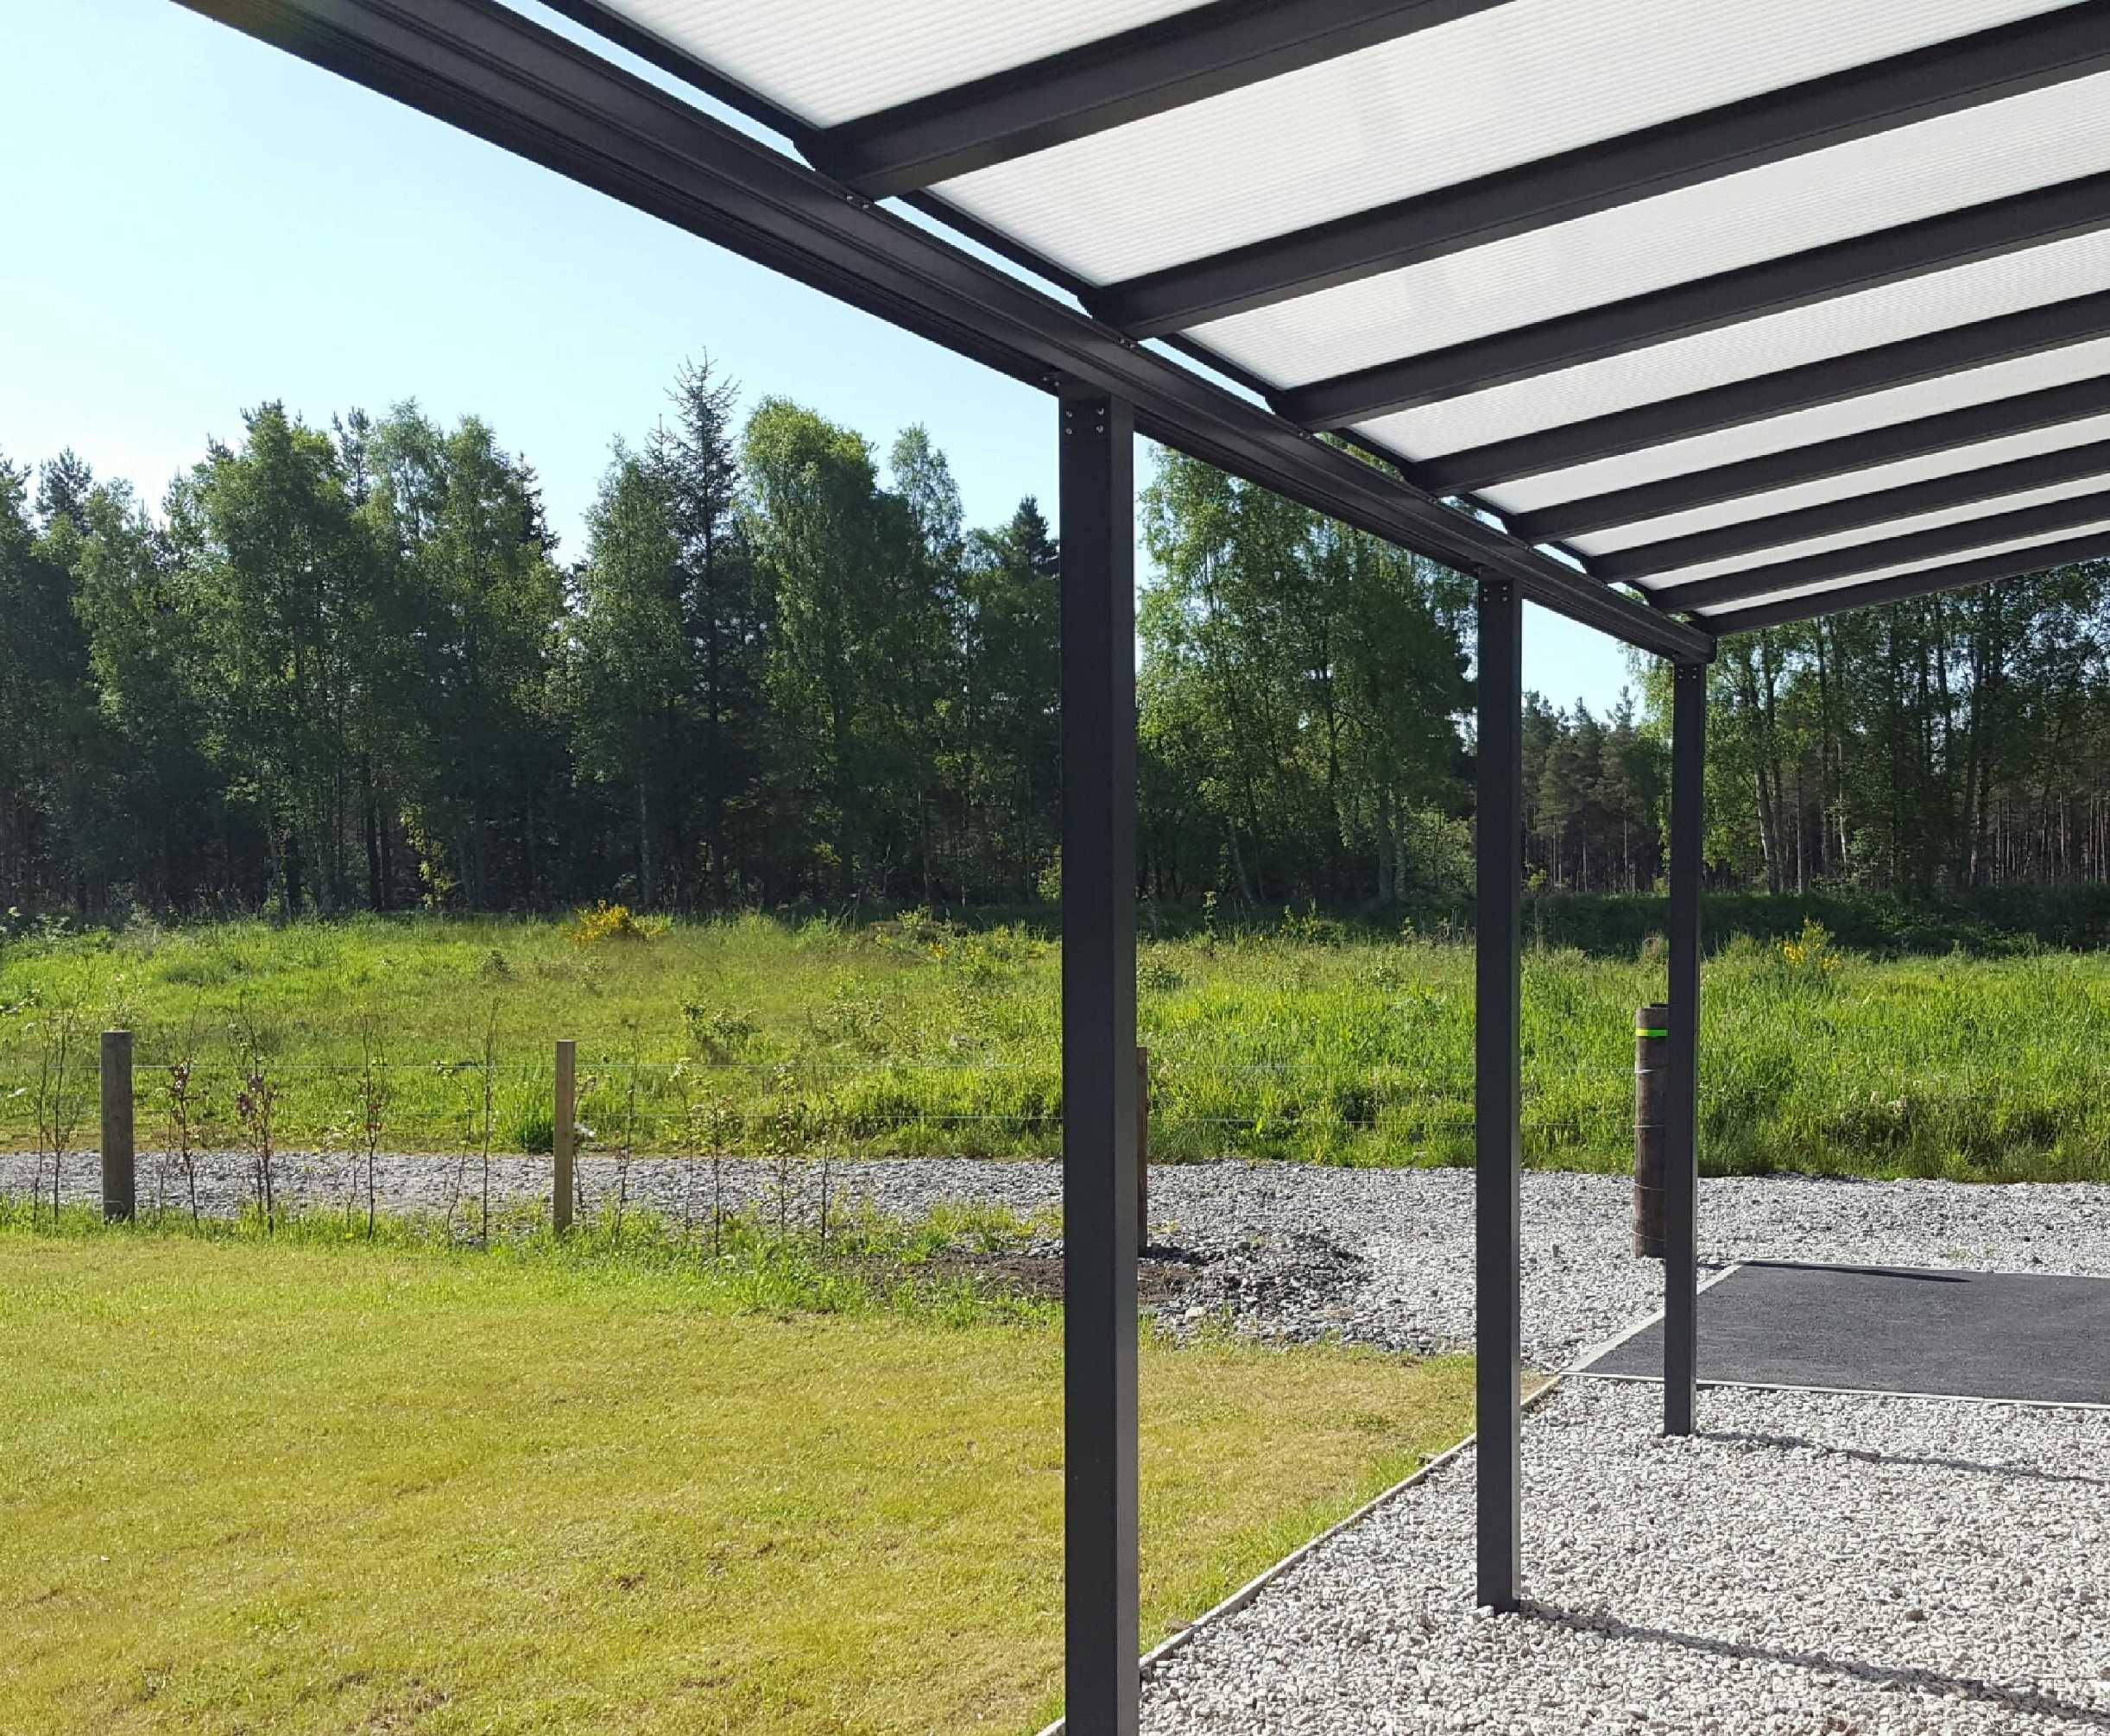 Omega Smart Lean-To Canopy, Anthracite Grey, 6mm Glass Clear Plate Polycarbonate Glazing - 3.5m (W) x 2.5m (P), (3) Supporting Posts